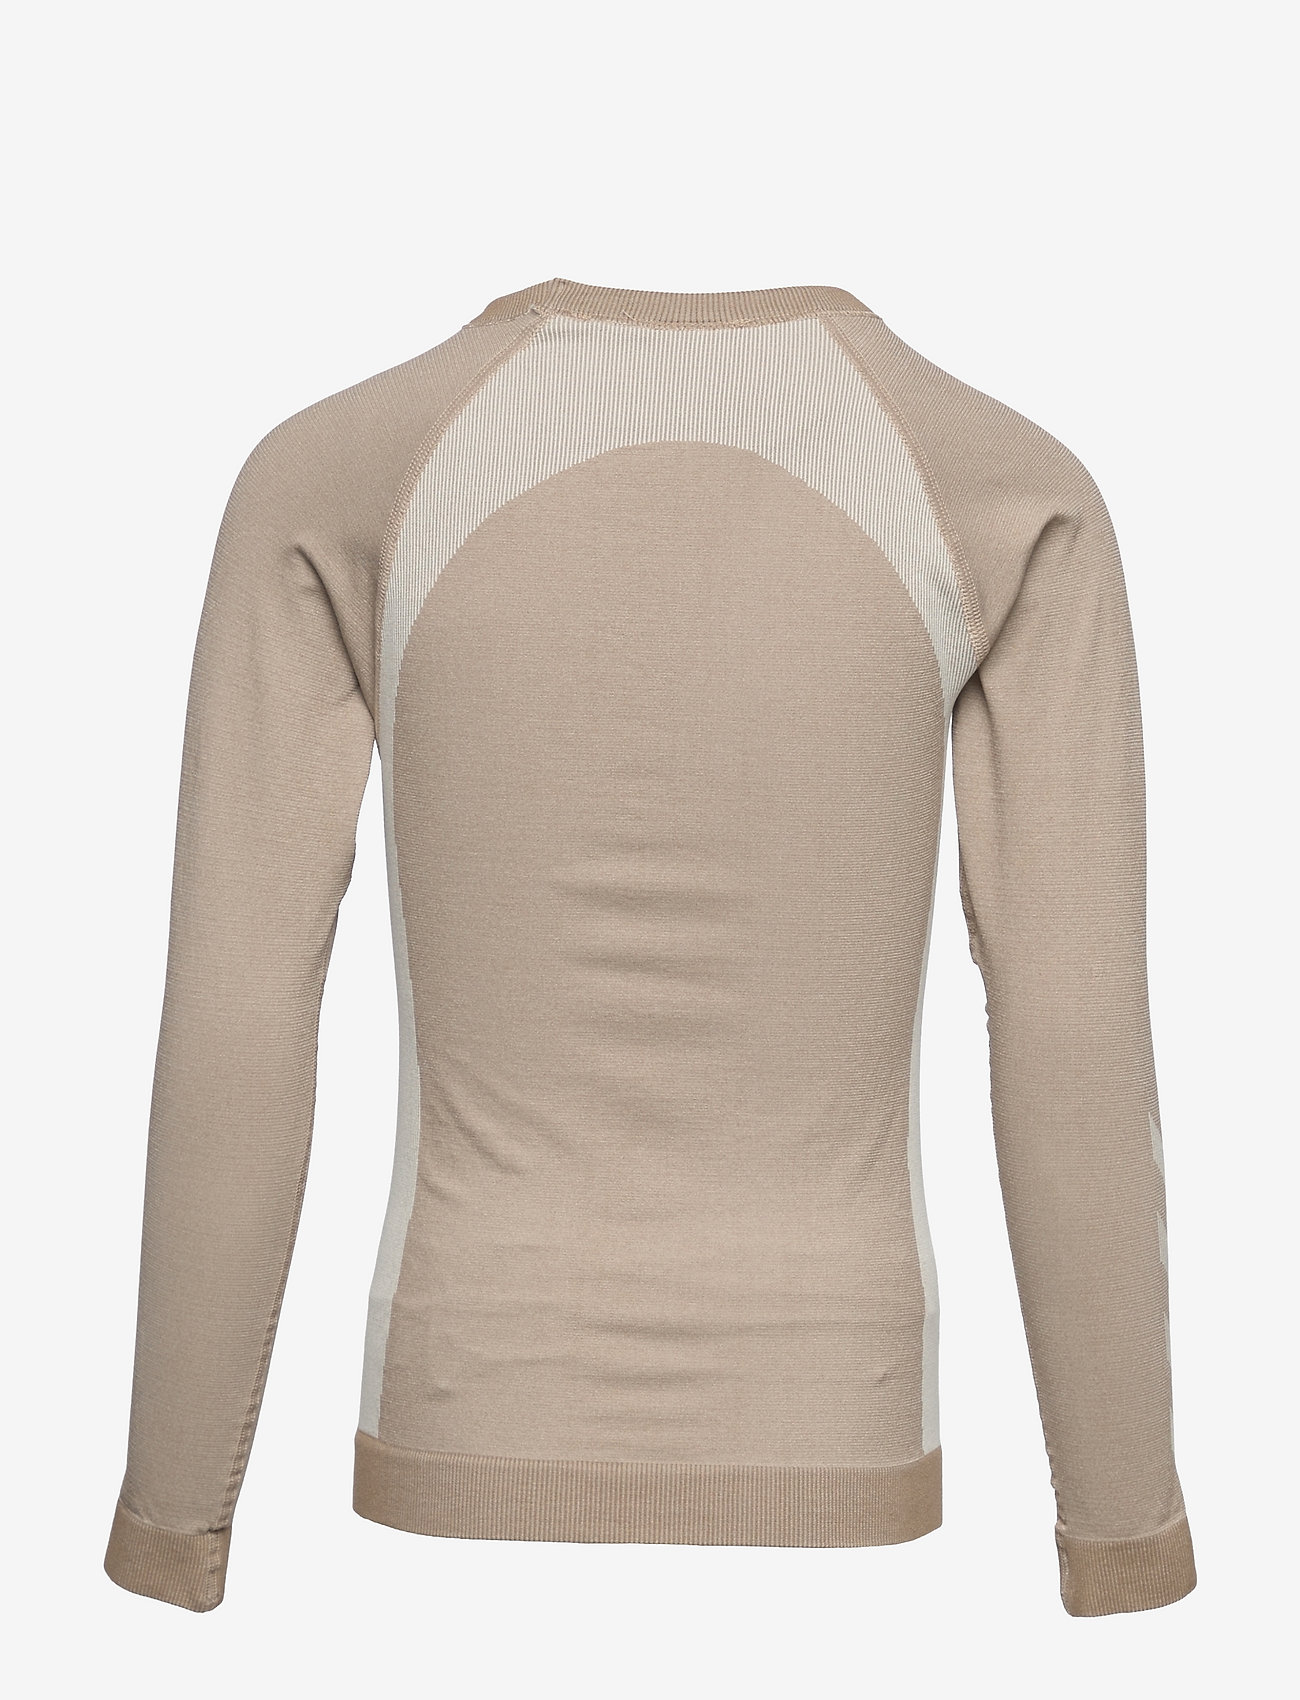 Hummel - hmlSPIN SEAMLESS T-SHIRT L/S - sports tops - simply taupe - 1